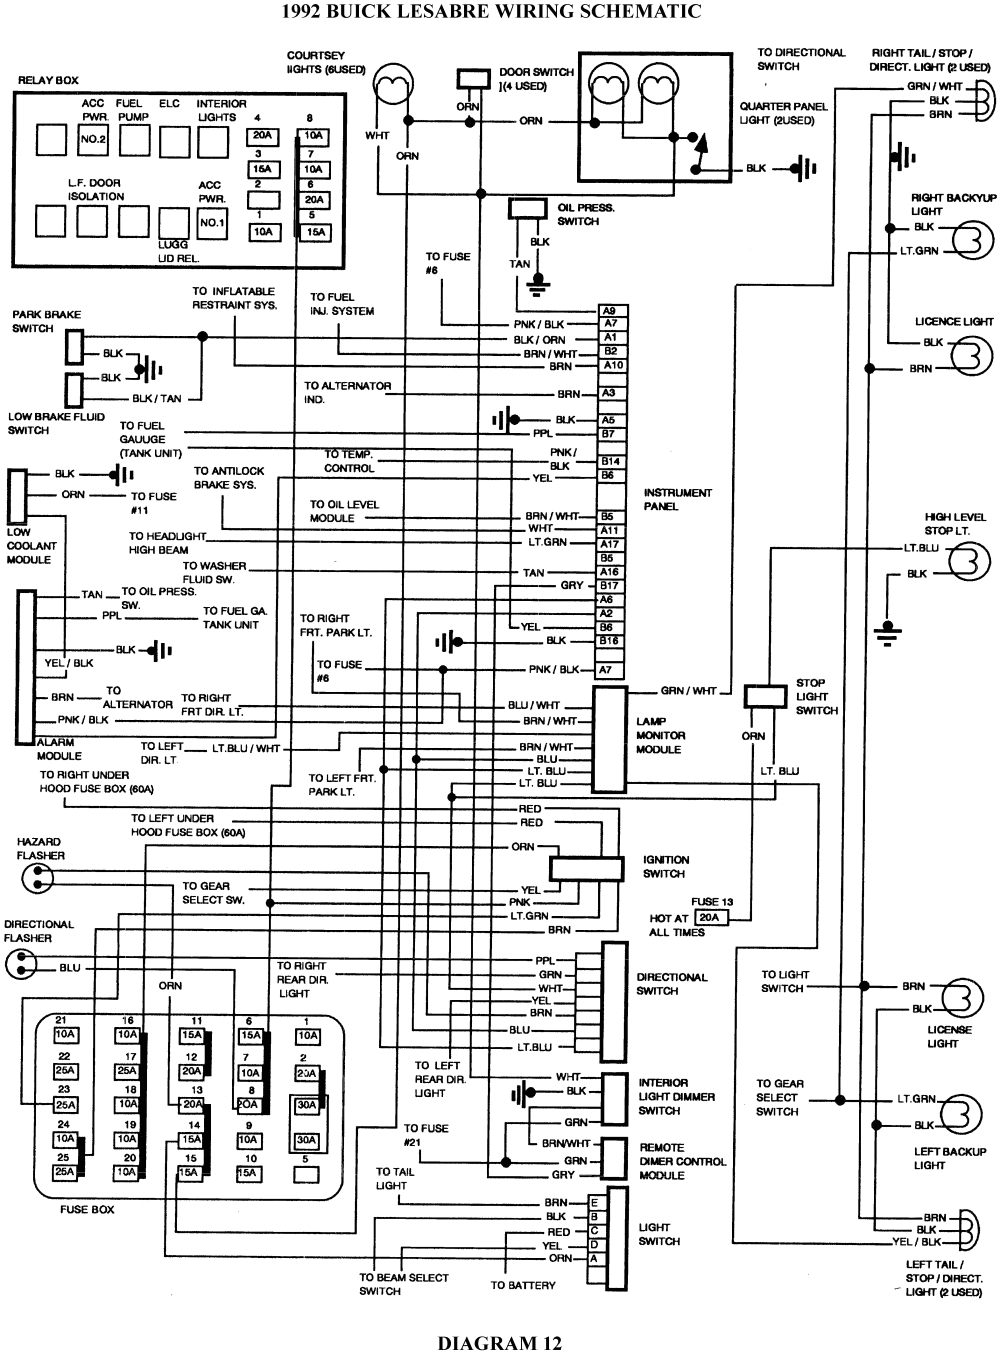 buick lesabre wiring schematic click image to see an enlarged view fig